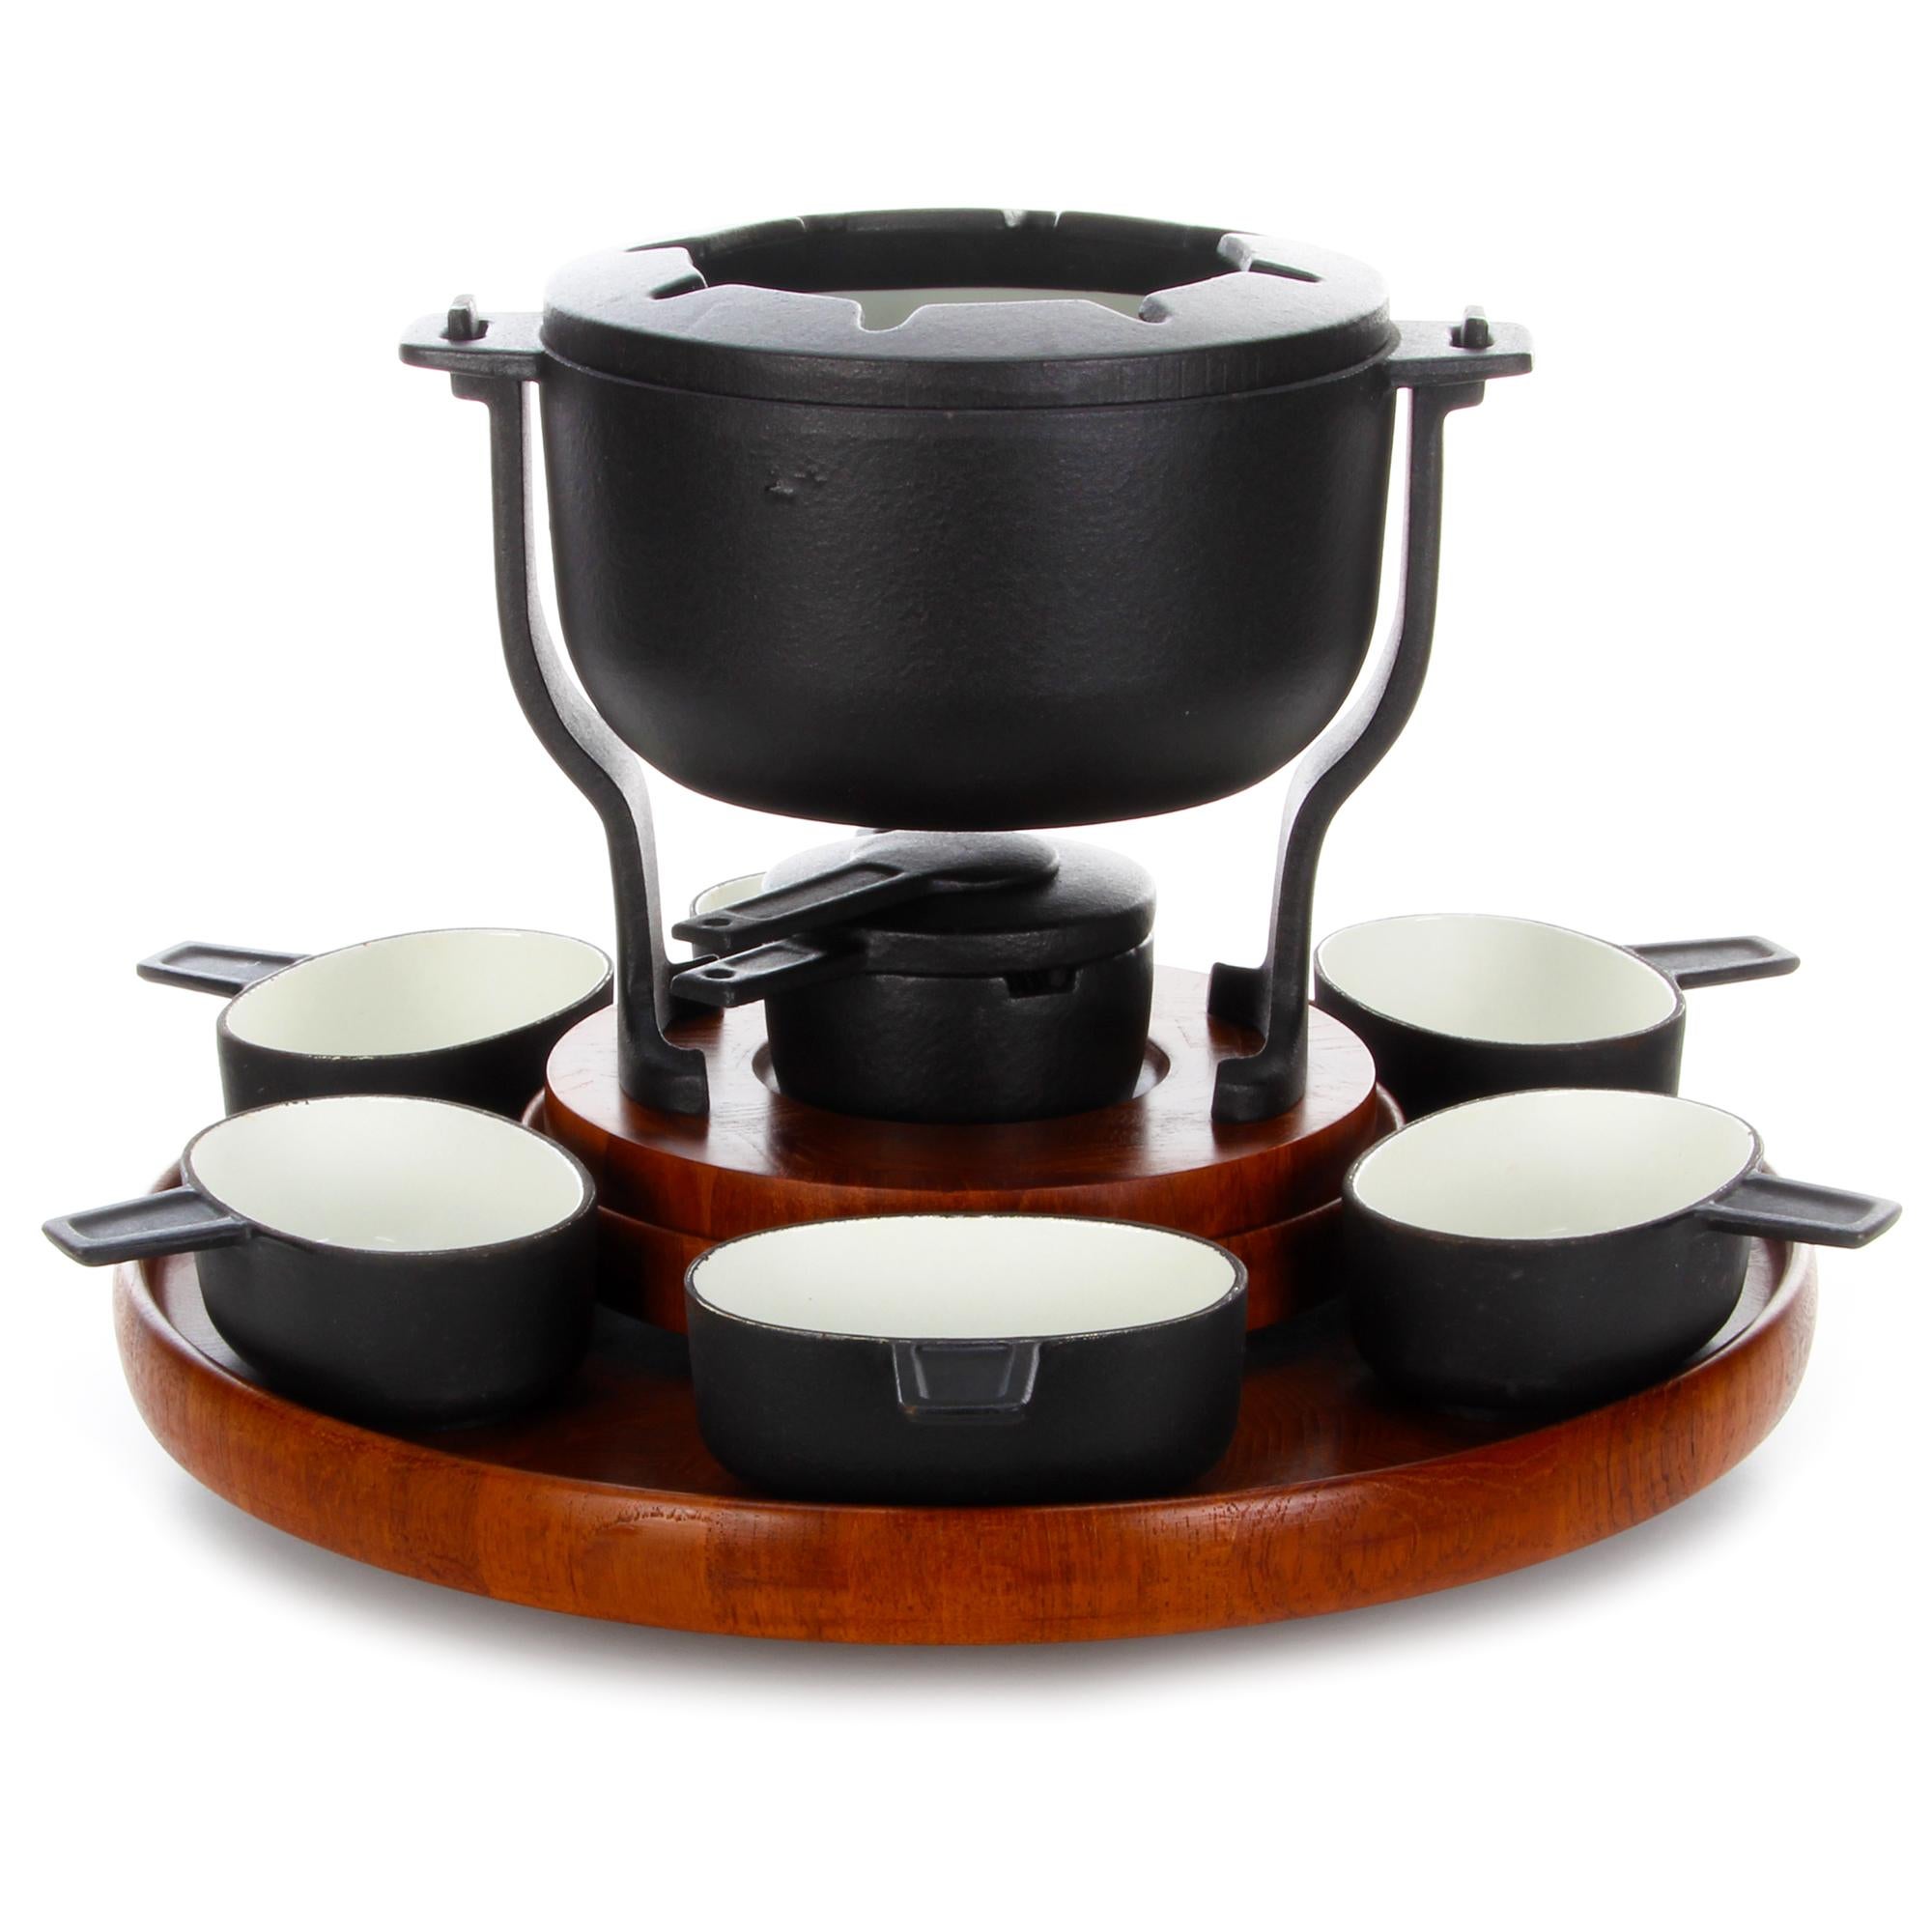 Fondue set, designed by Flemming Digsmed (presumed) in the 1960s, beautiful complete teak and cast iron fondue set in very good vintage condition.

A very stylish fondue set comprised of a teak Lazy Susan/turntable with a static center, where a